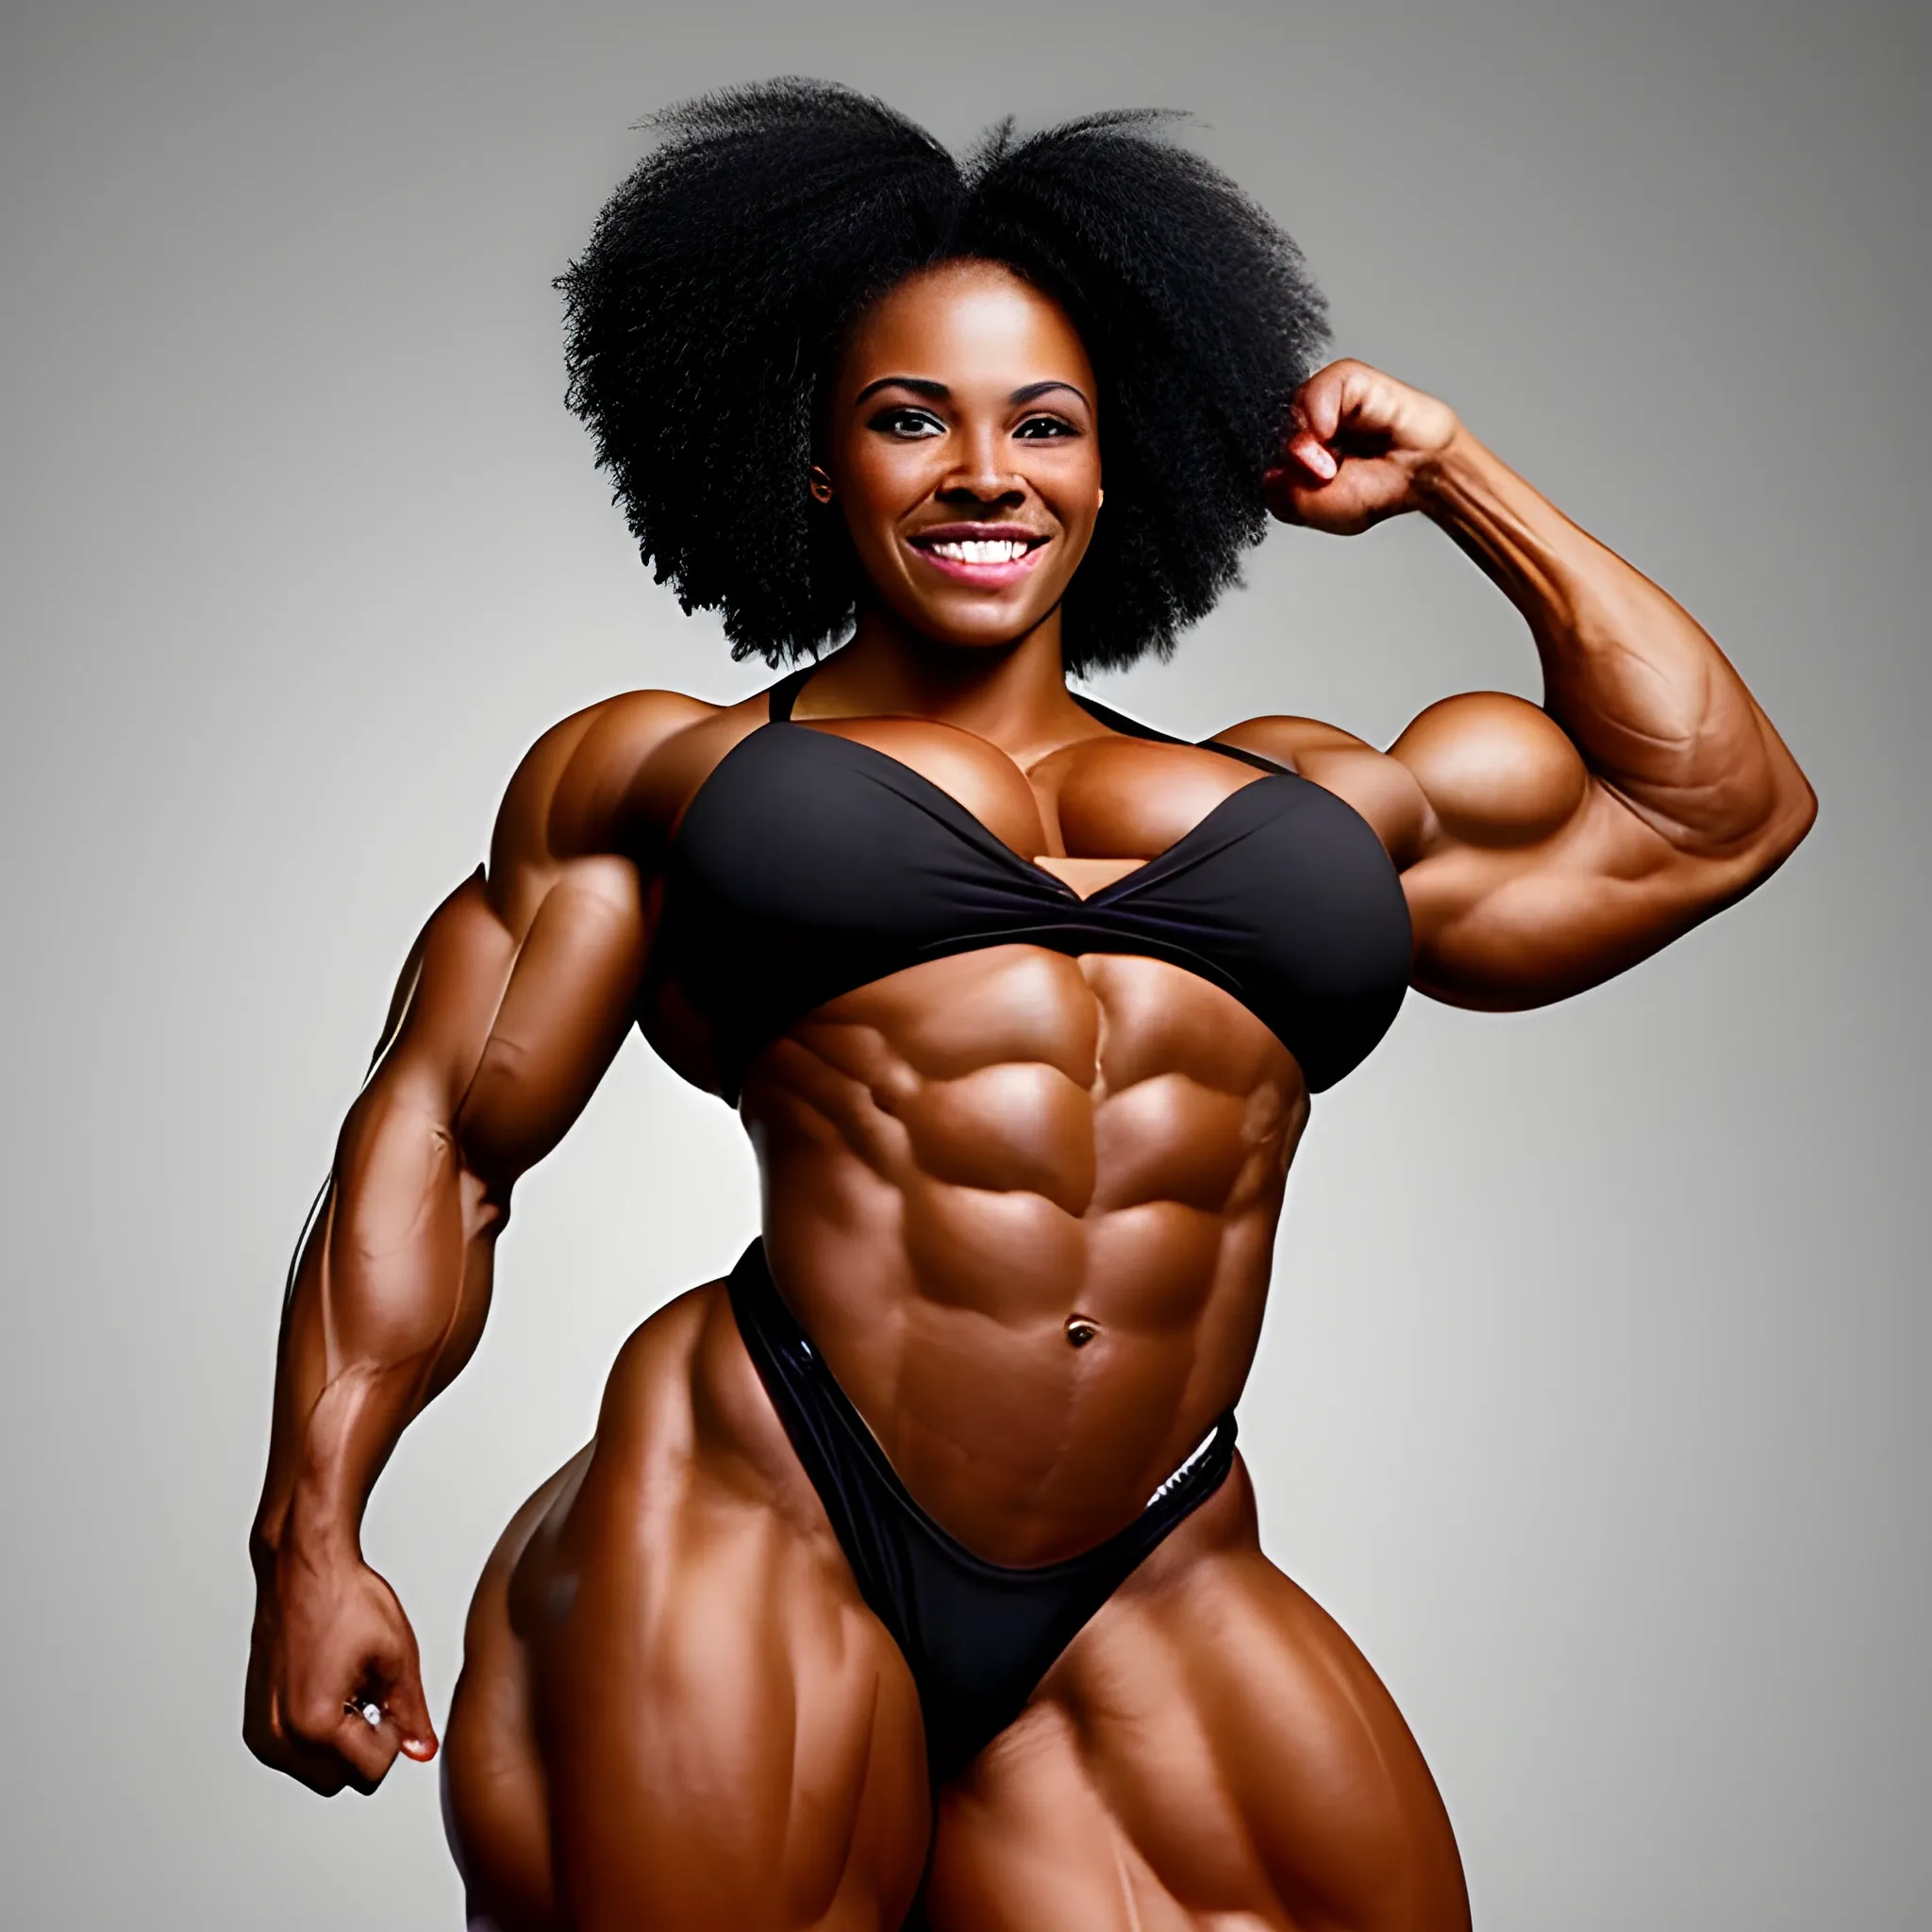 a triumphant heavyweight beautiful black black female bodybuilder with wide-set eyes with very narrow hips and waist, muscular, smiling, expressive eyes, ten-pack abs, perfect in every way, chesty musculature with big shoulders and big biceps.

